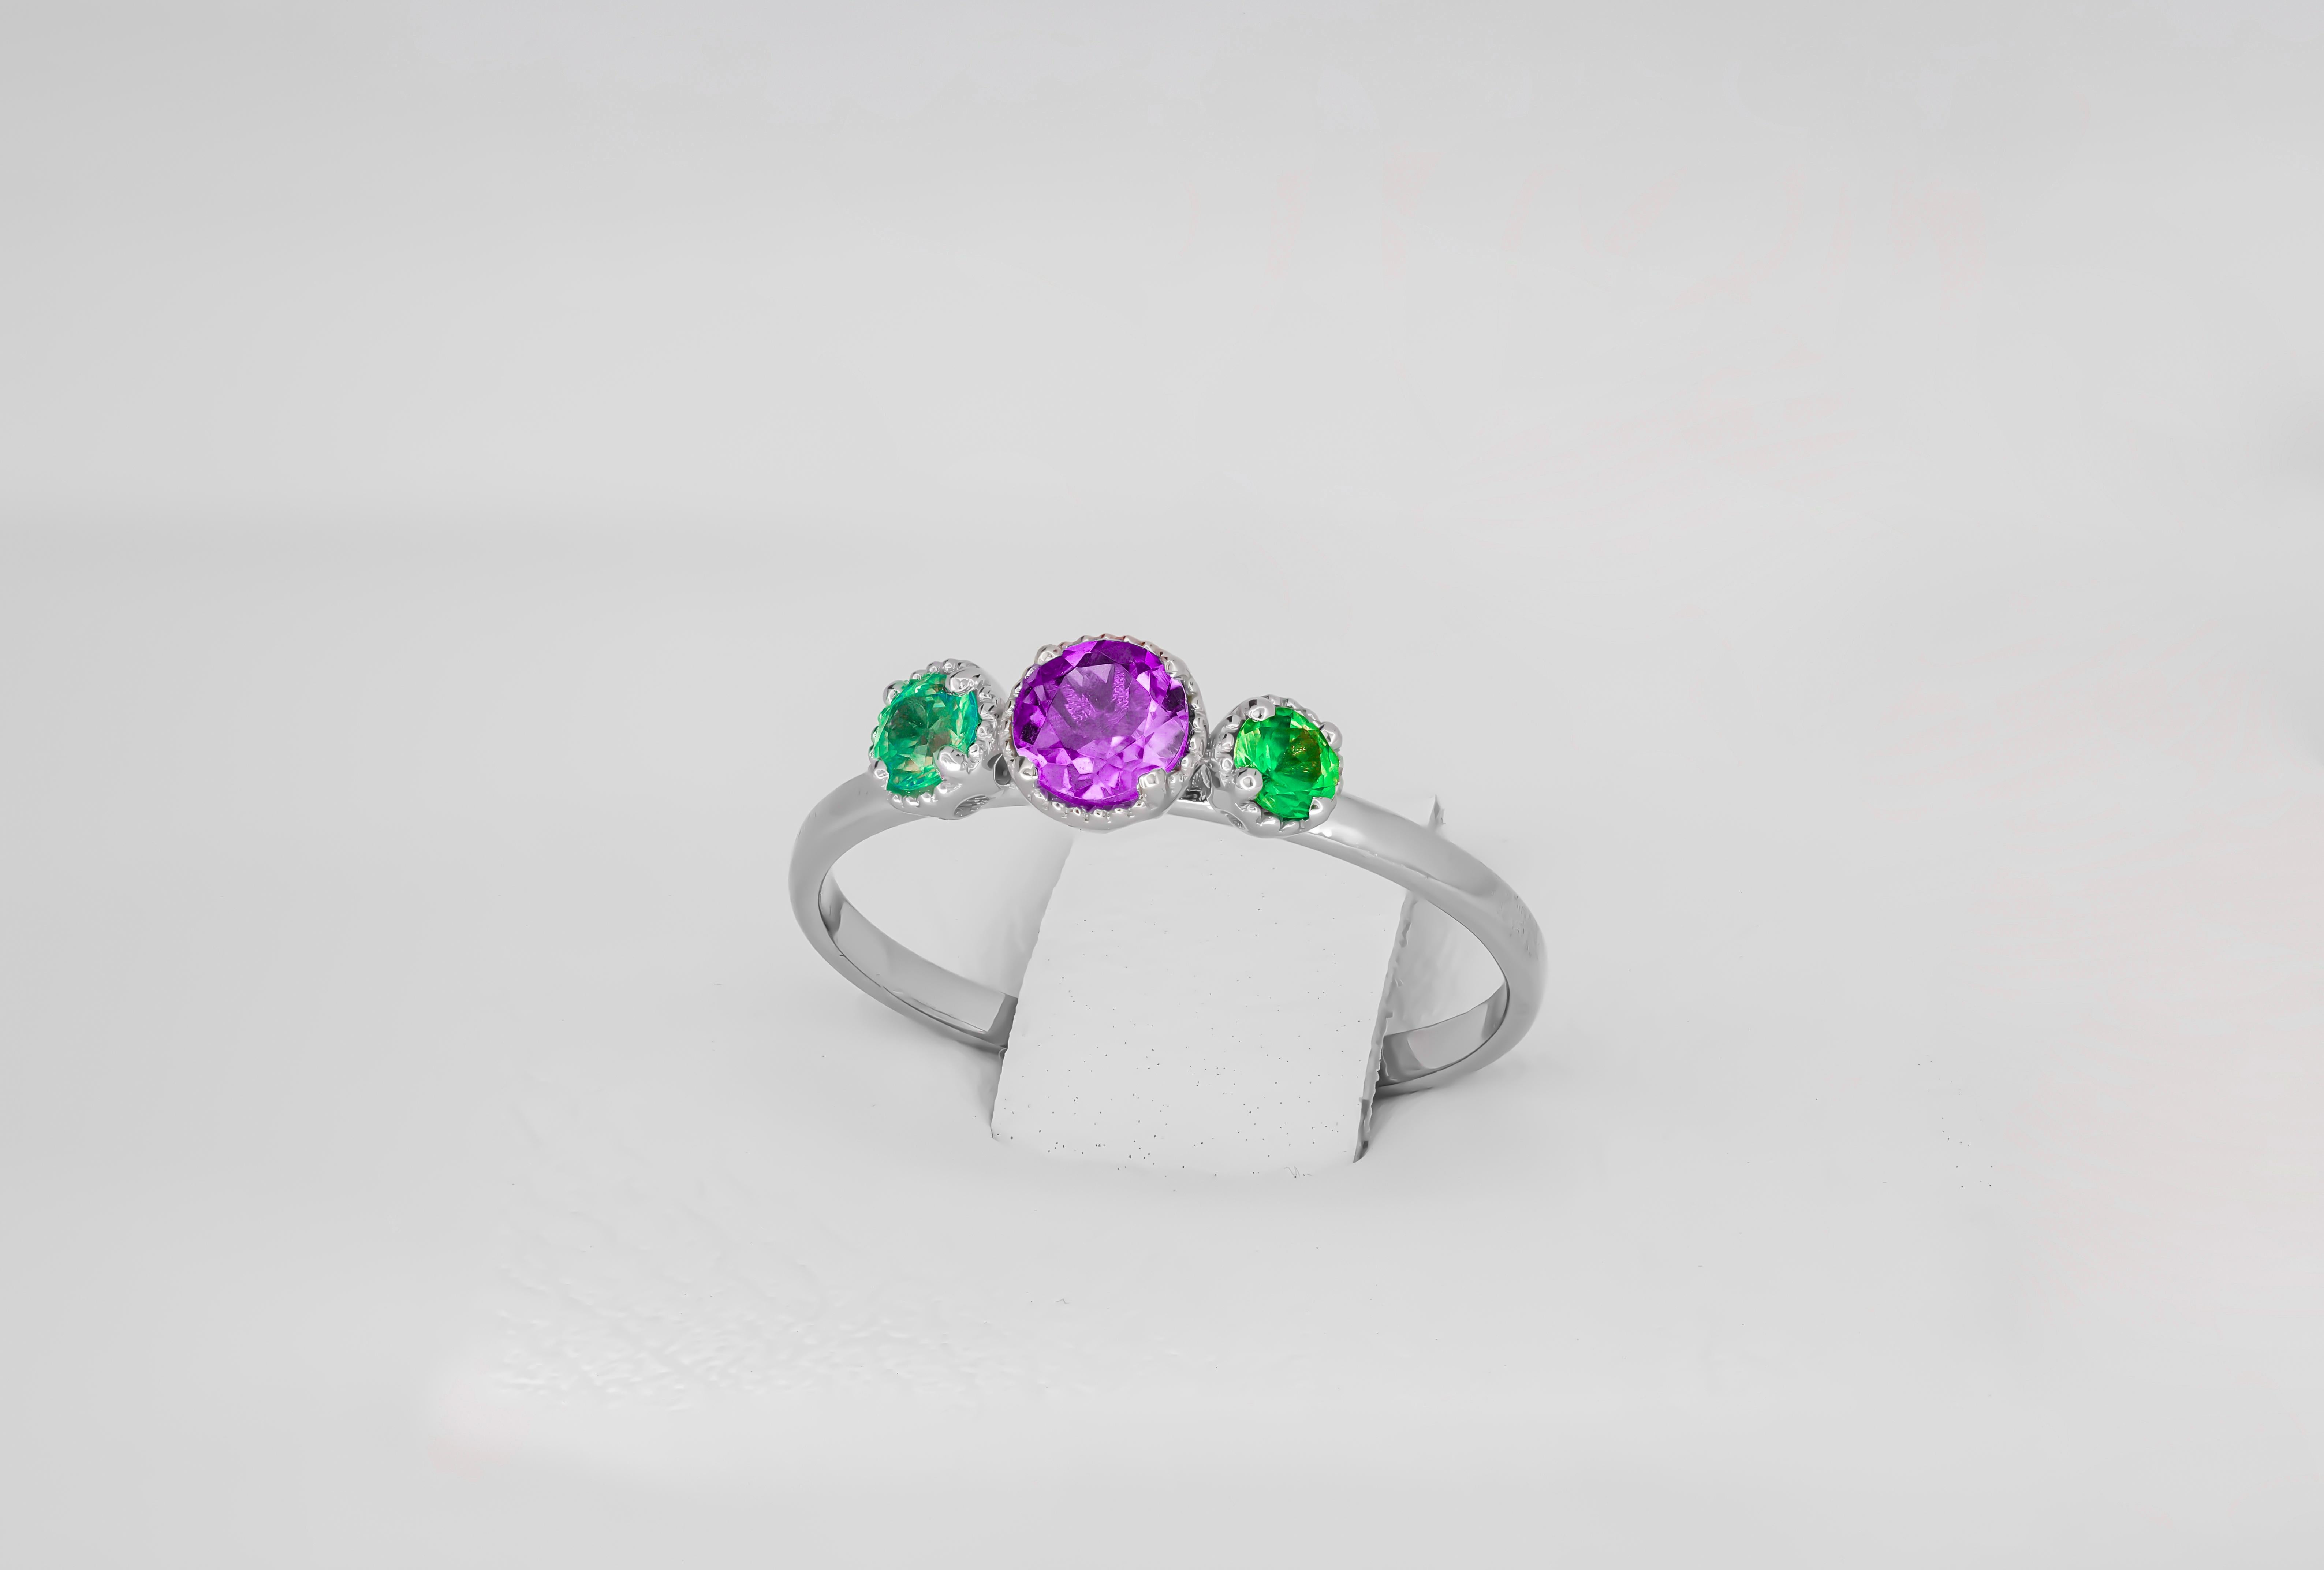 For Sale:  Green and purple gem 14k gold ring. 6